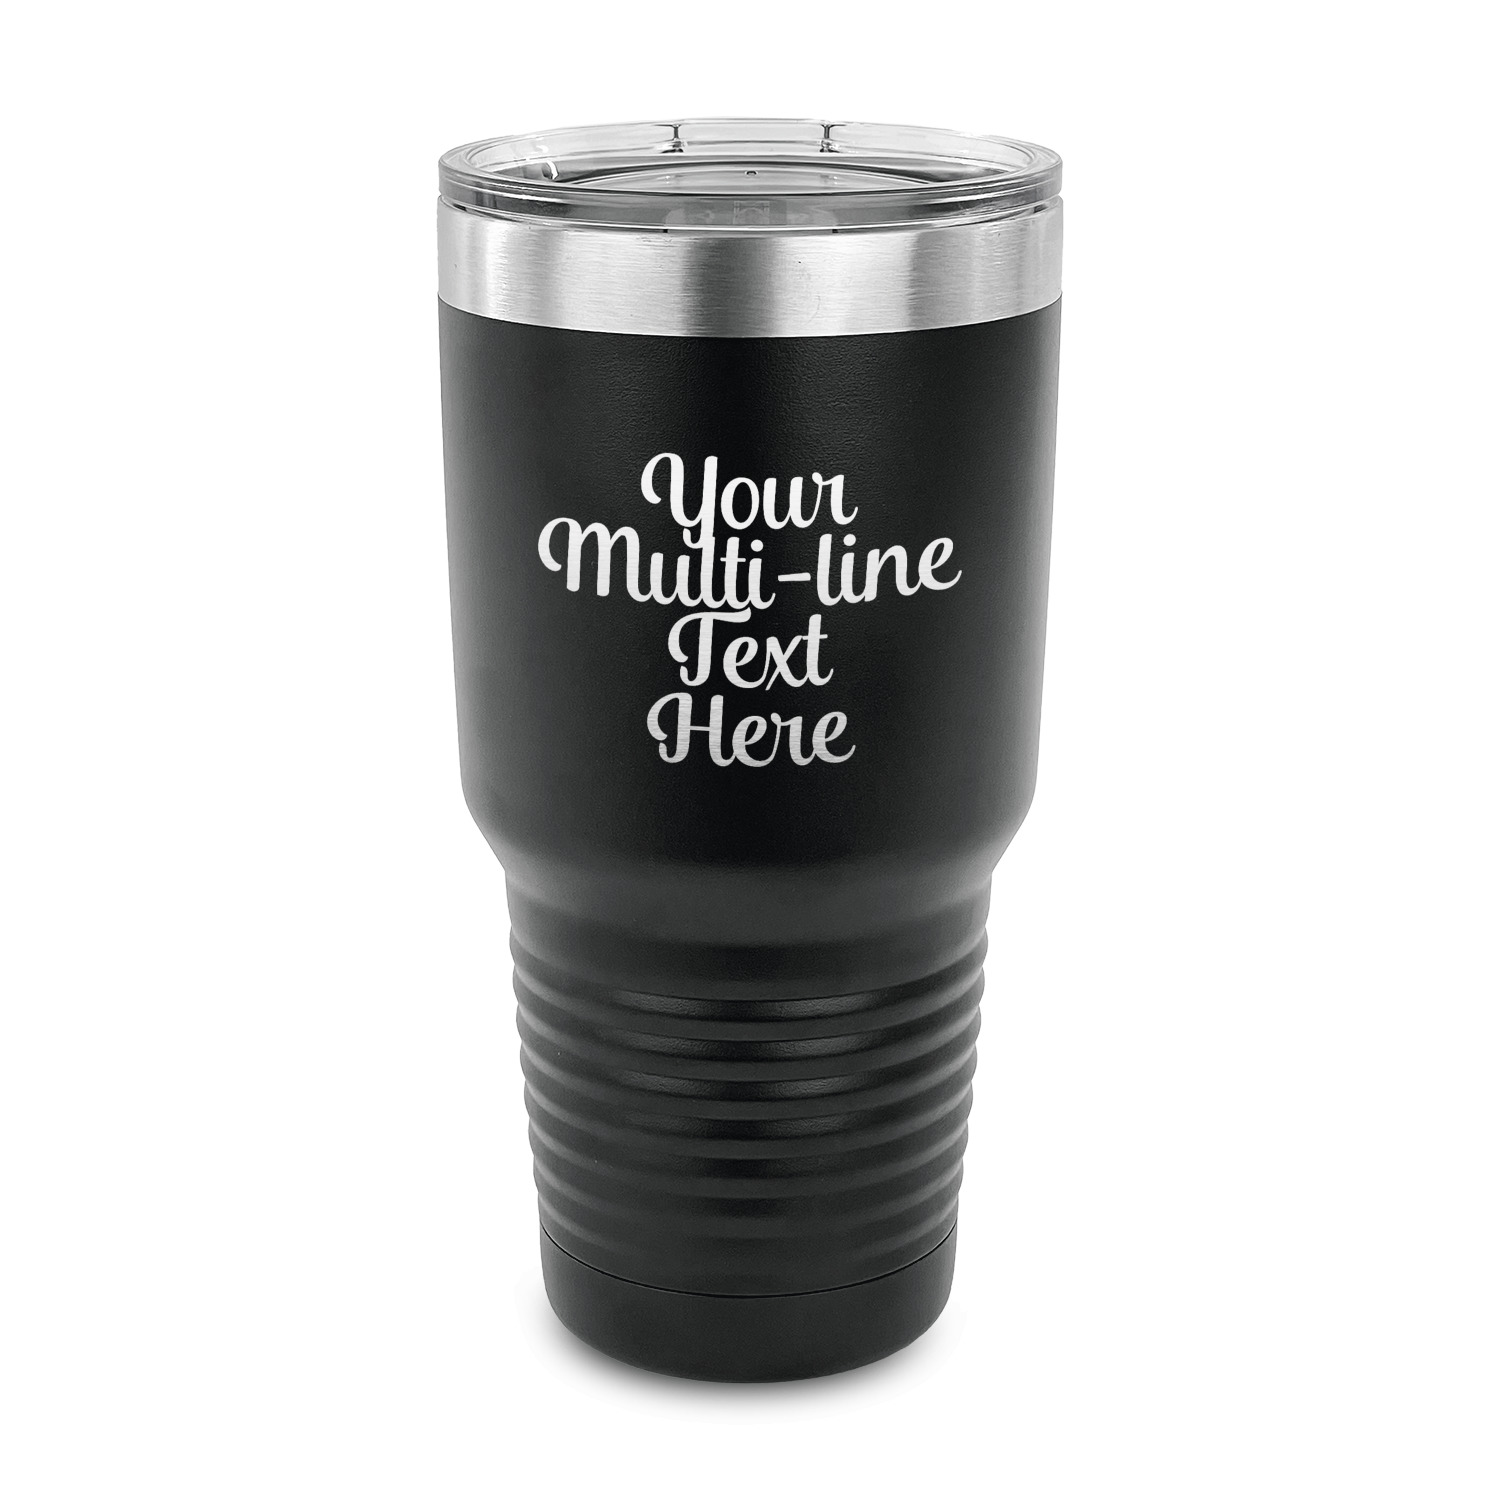 https://www.youcustomizeit.com/common/MAKE/837471/Multiline-Text-30-oz-Stainless-Steel-Ringneck-Tumblers-Black-FRONT.jpg?lm=1655155356